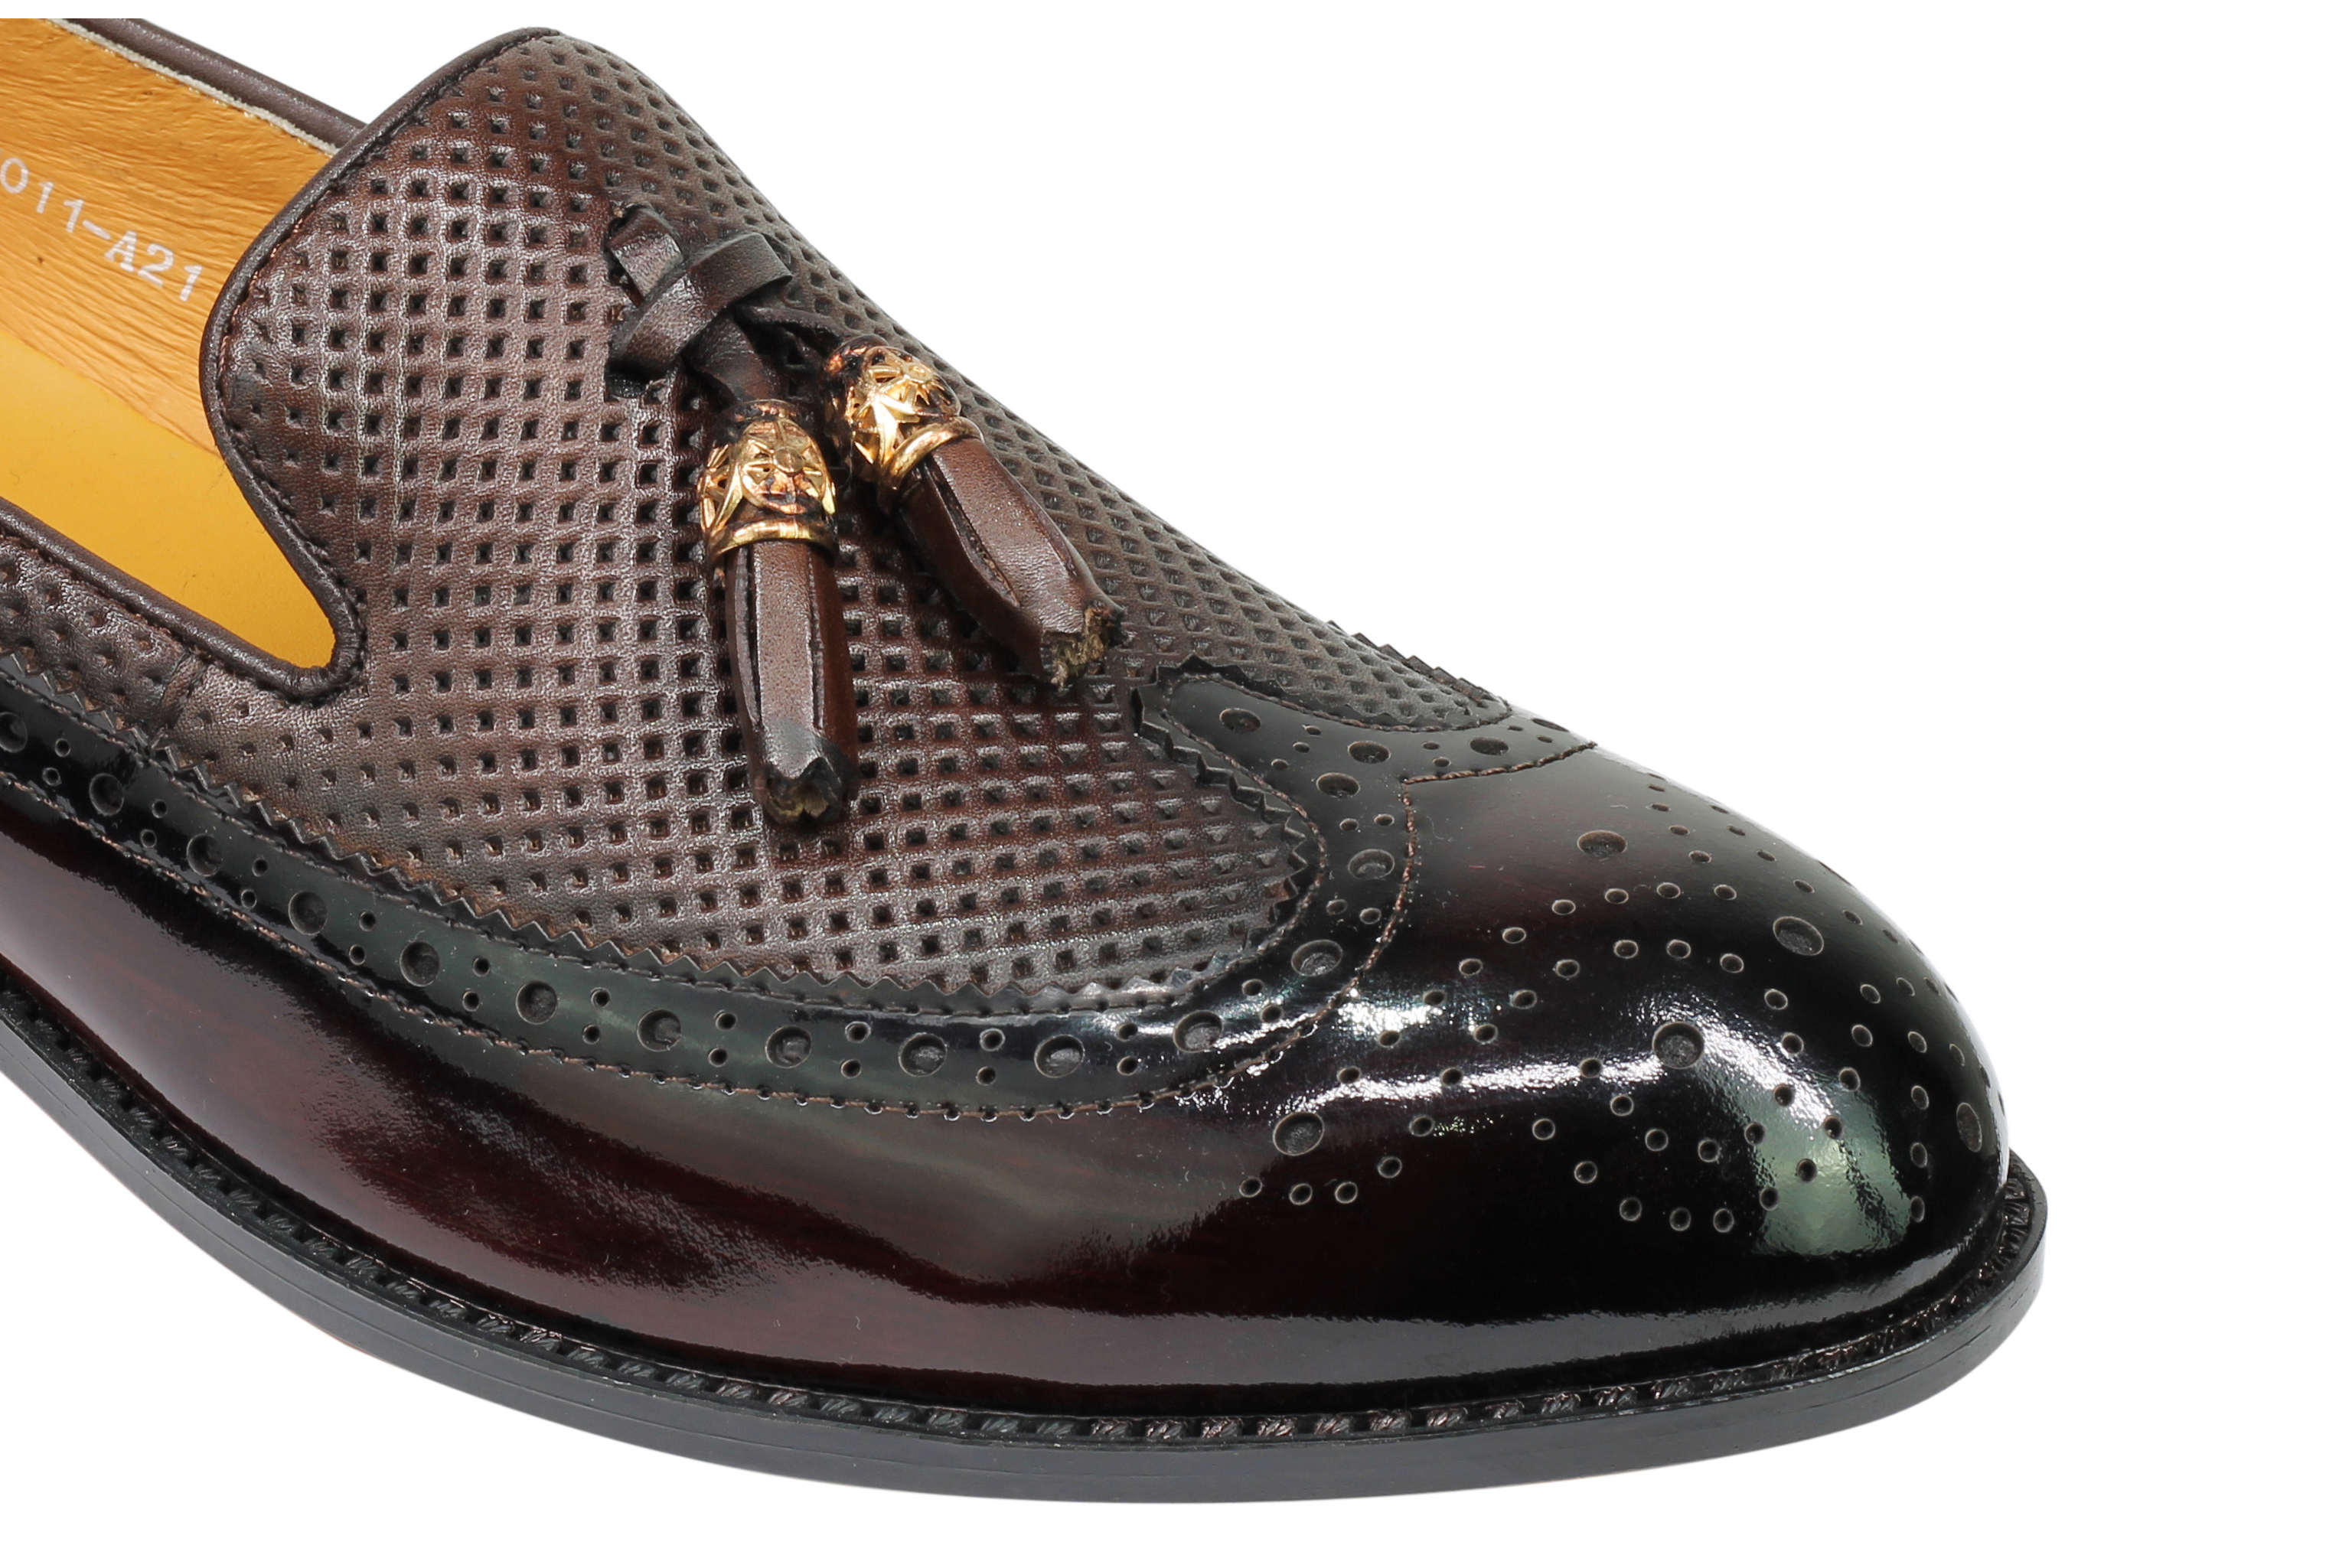 Real Leather Patent Tassel Slip Loafers